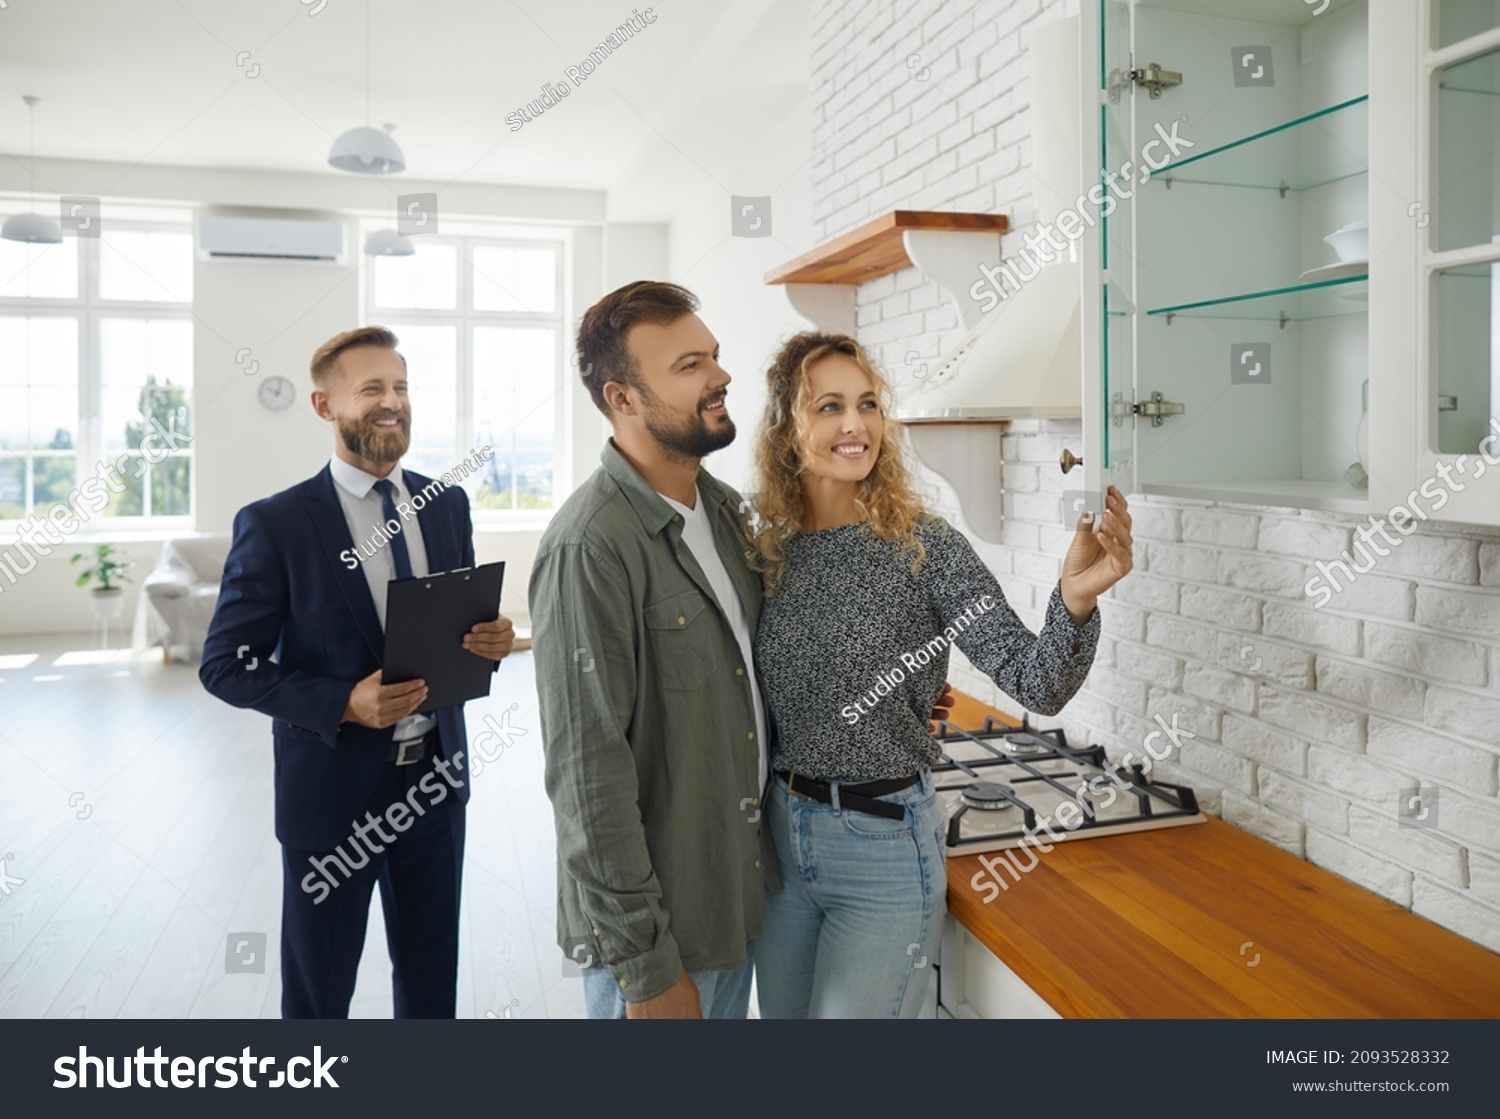 Realtor with customers checking apartmnet. Couple examines furniture in kitchen while inspecting house with real estate agent. Friendly male realtor advises young family before buying new home. #2093528332